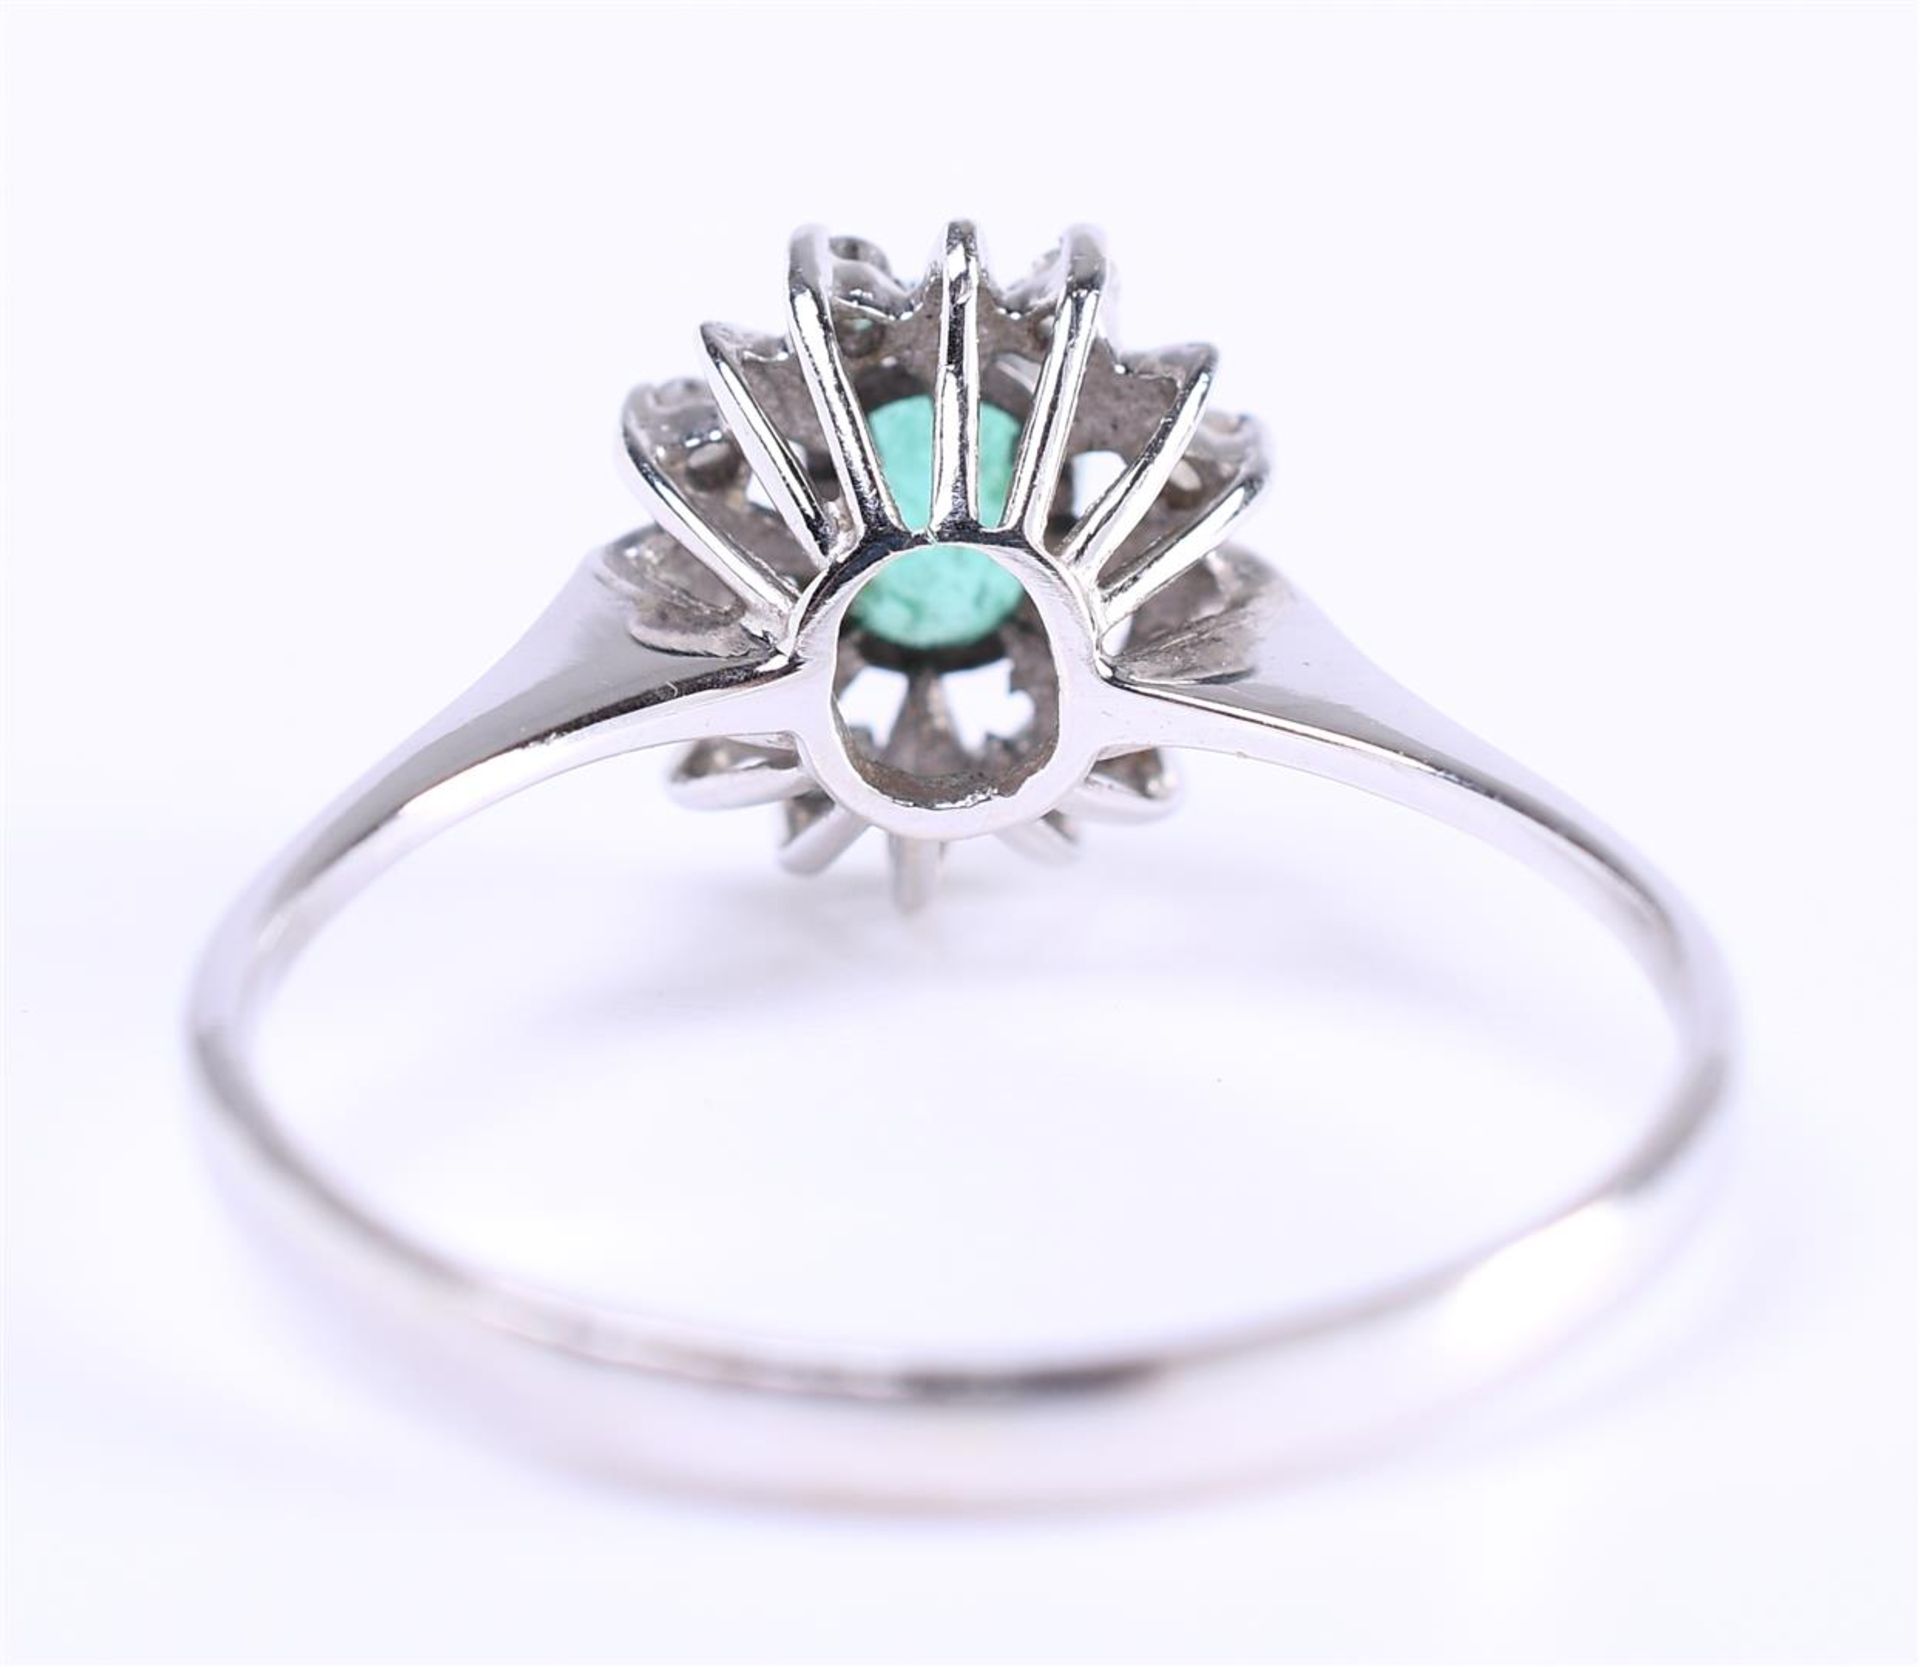 18 carat white gold (rhodium-plated) rosette ring with beautiful star points all around - Bild 5 aus 5